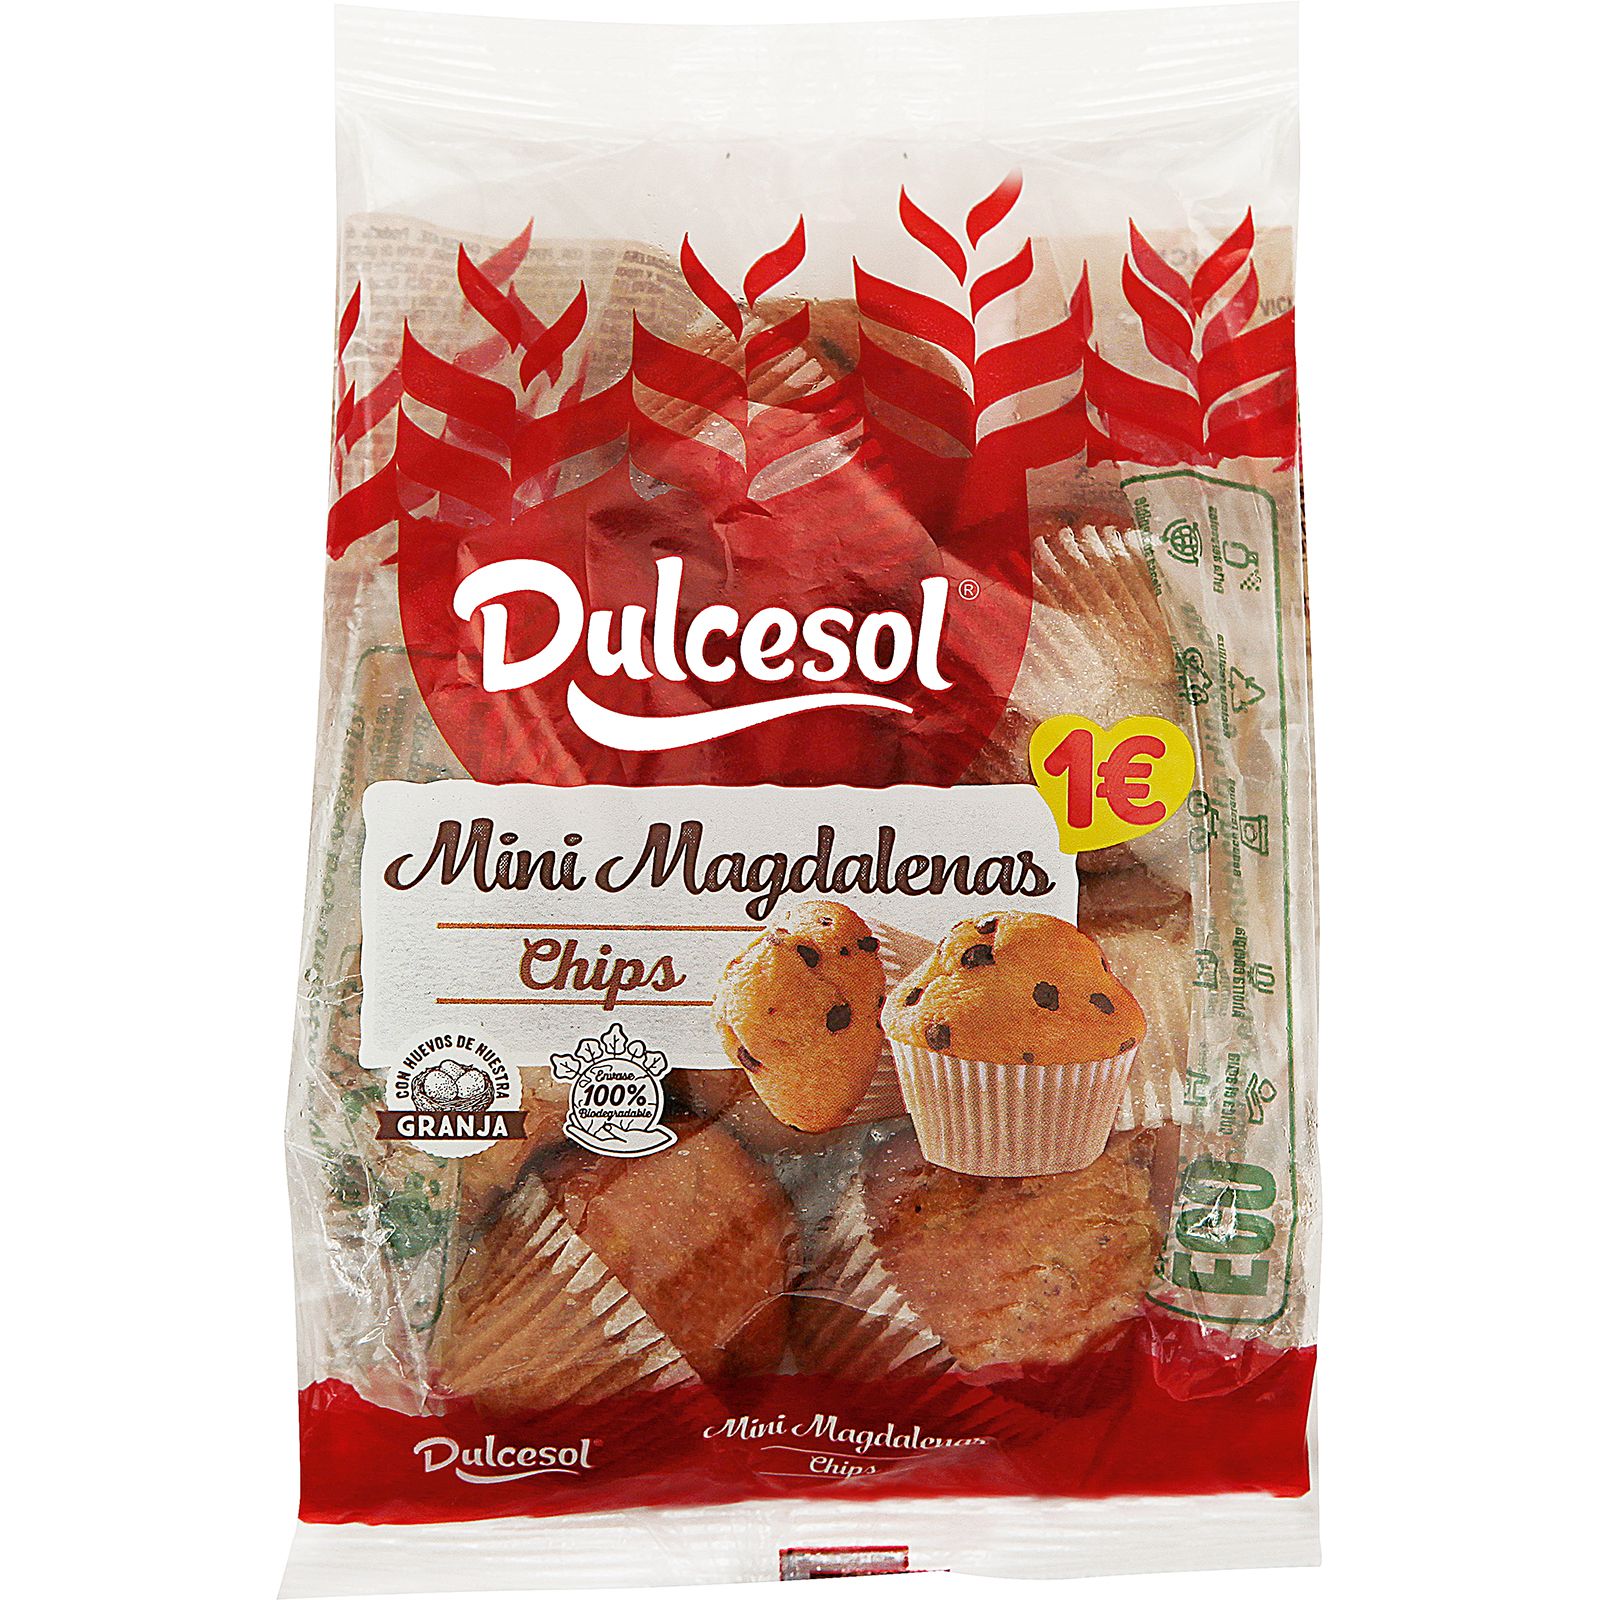 Dulcesol Mini Magdalenas Chocolate Chip 128g (July 23) RRP £1 CLEARANCE XL 59p or 2 for £1